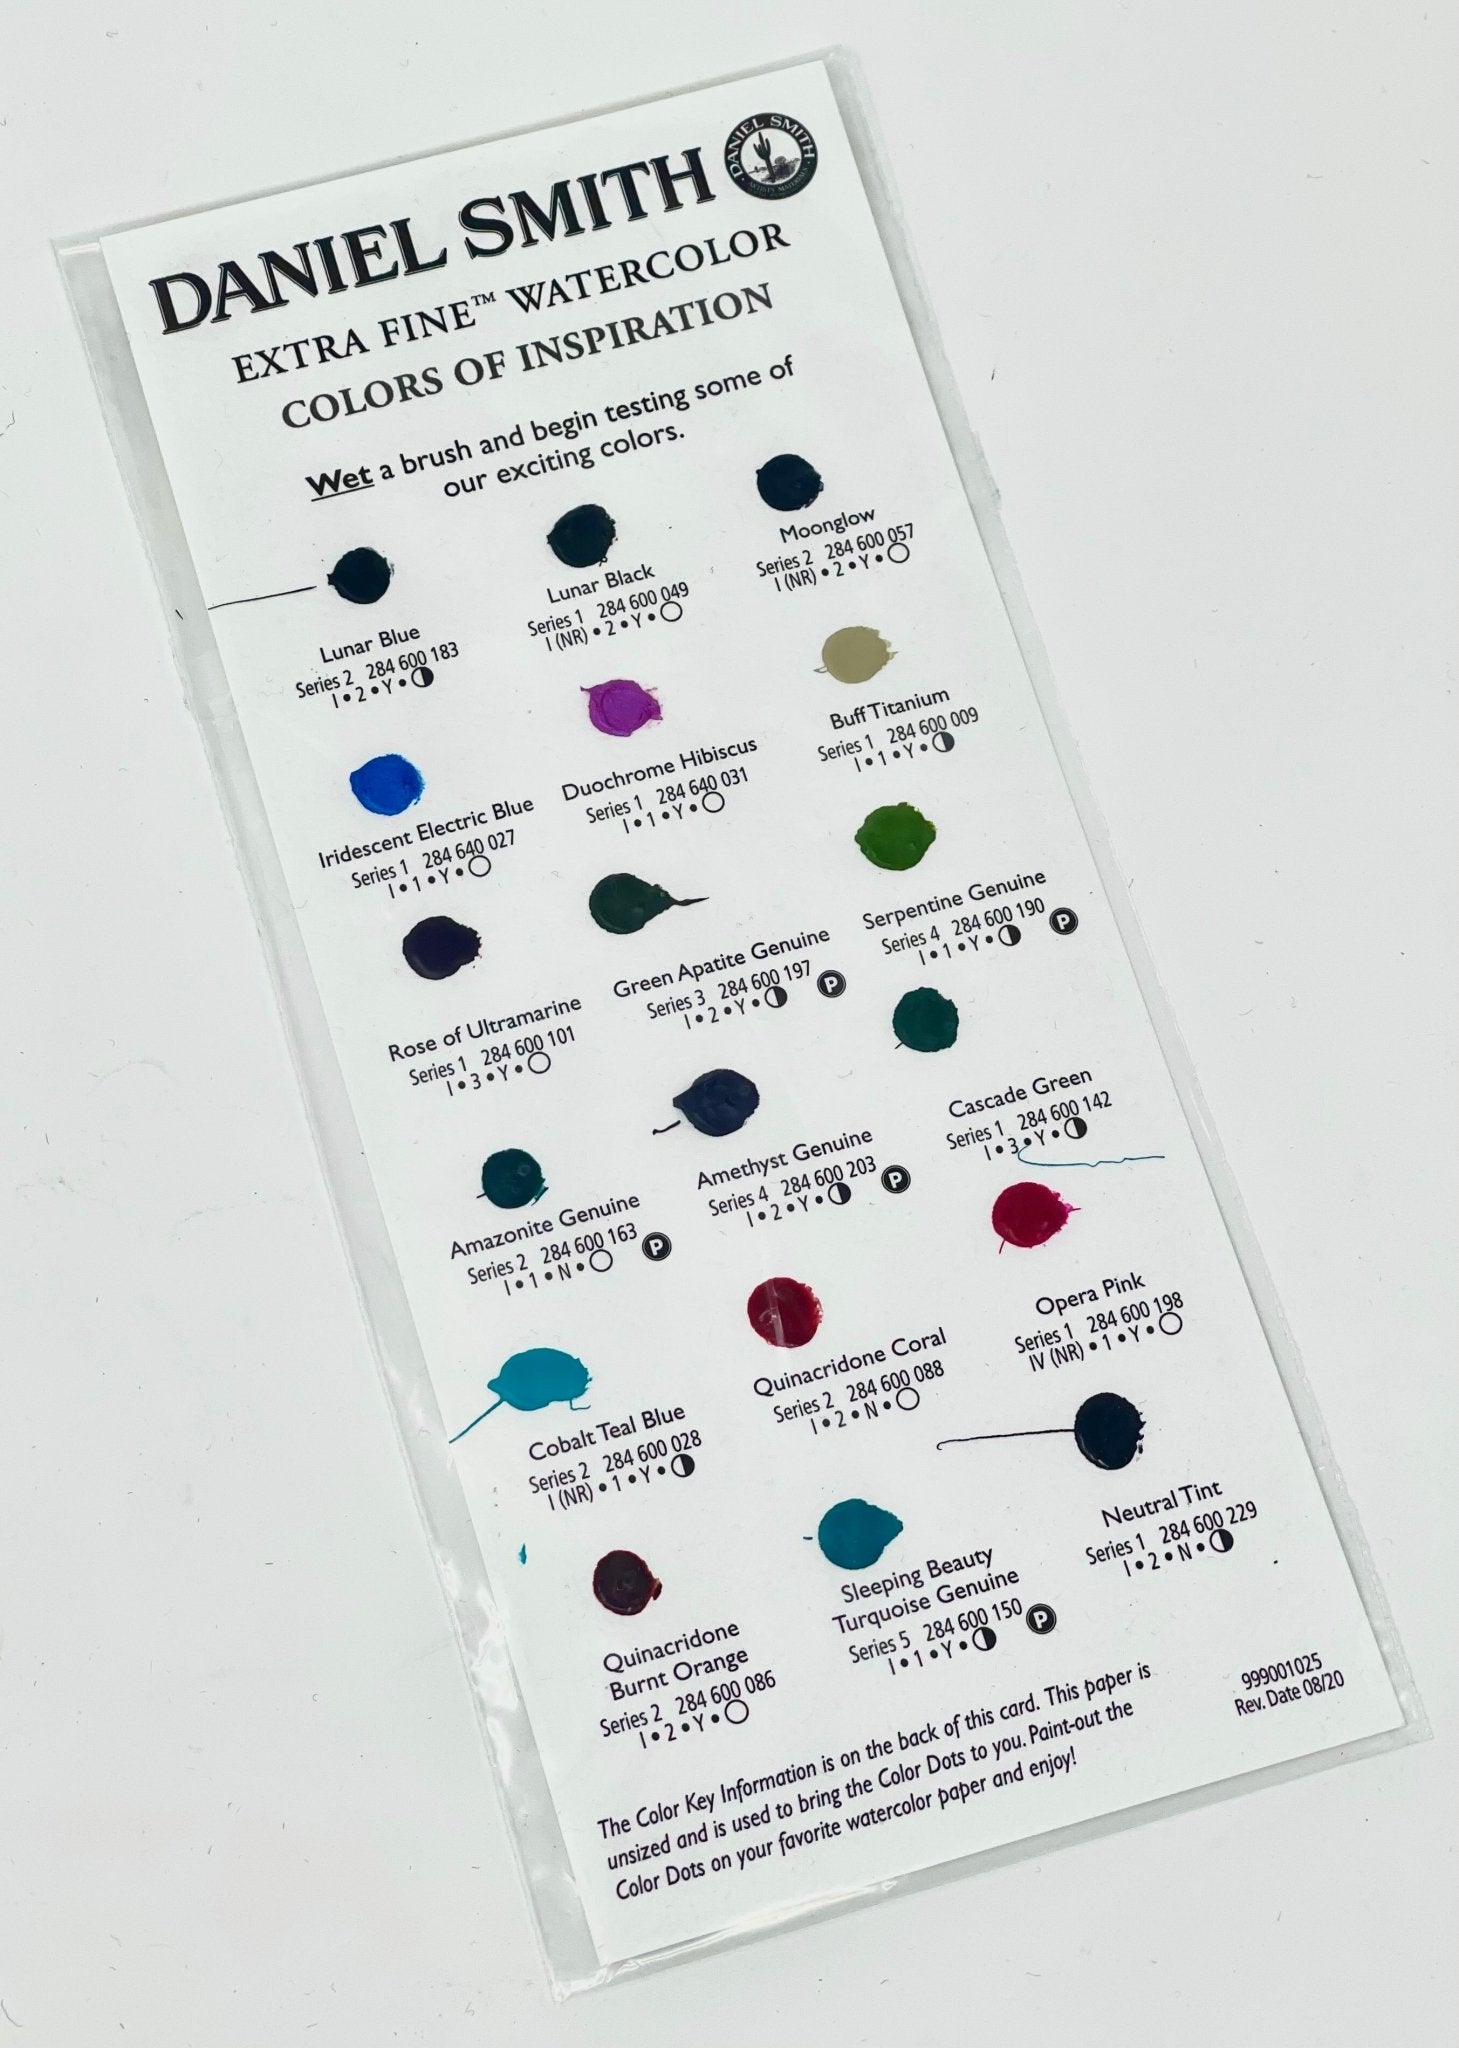 Daniel Smith Dot Card Sampler - FREE with Purchase of $15 or more of Daniel Smith Products! One per order please. - merriartist.com